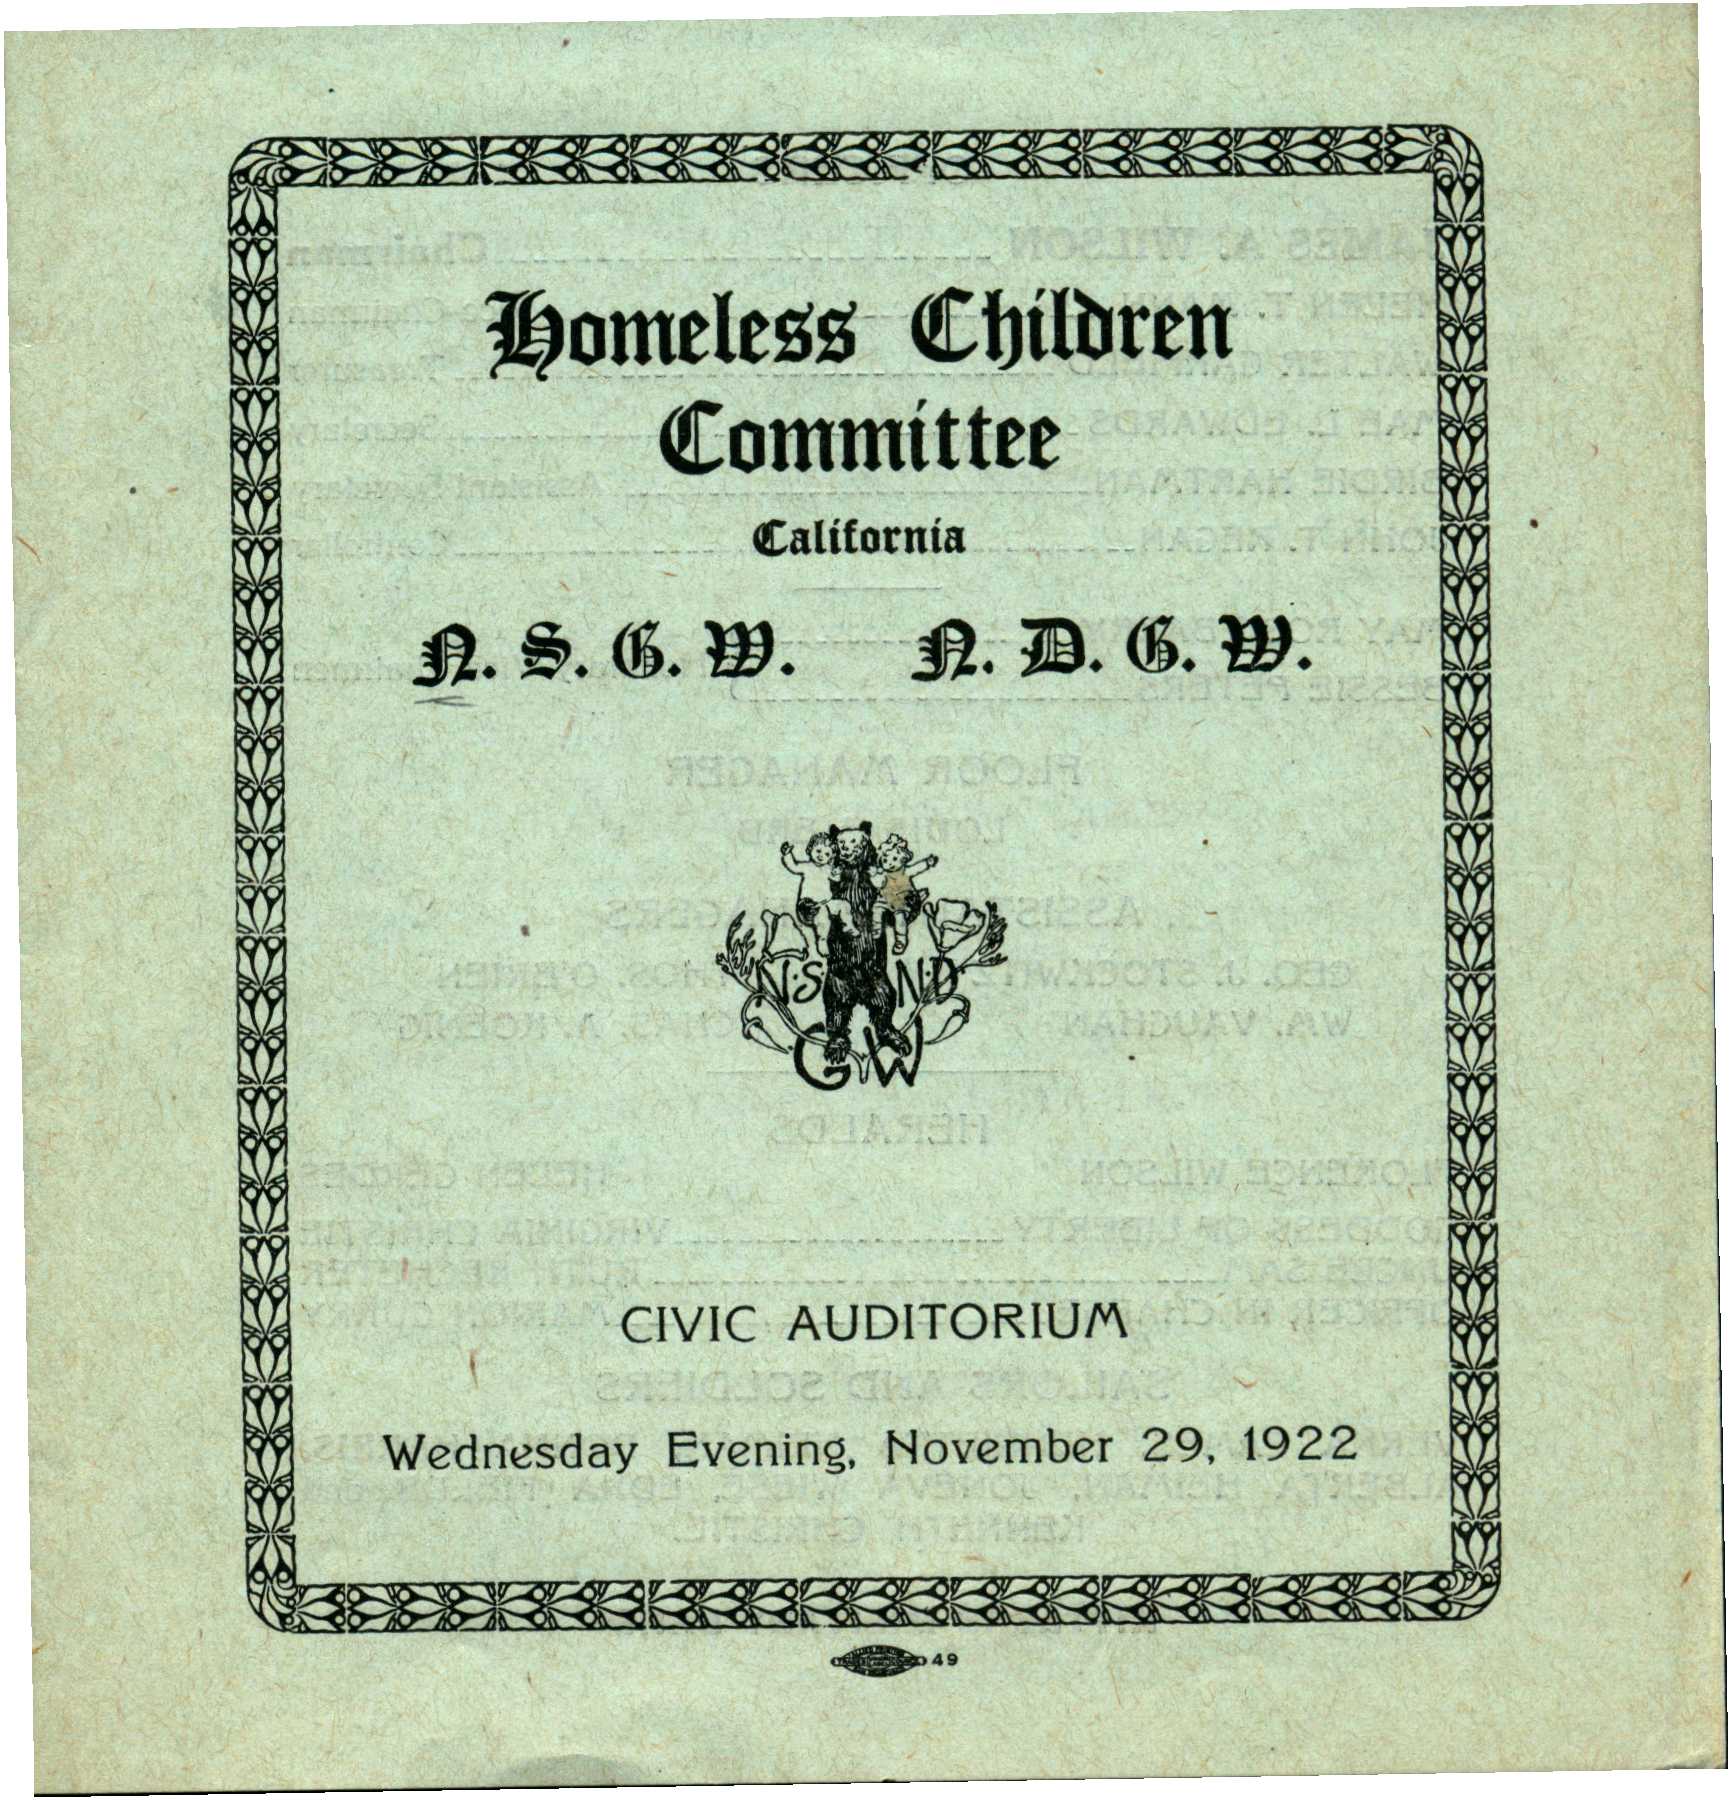 Front cover  shows a logo of a bear holding two children and information about the event date and location